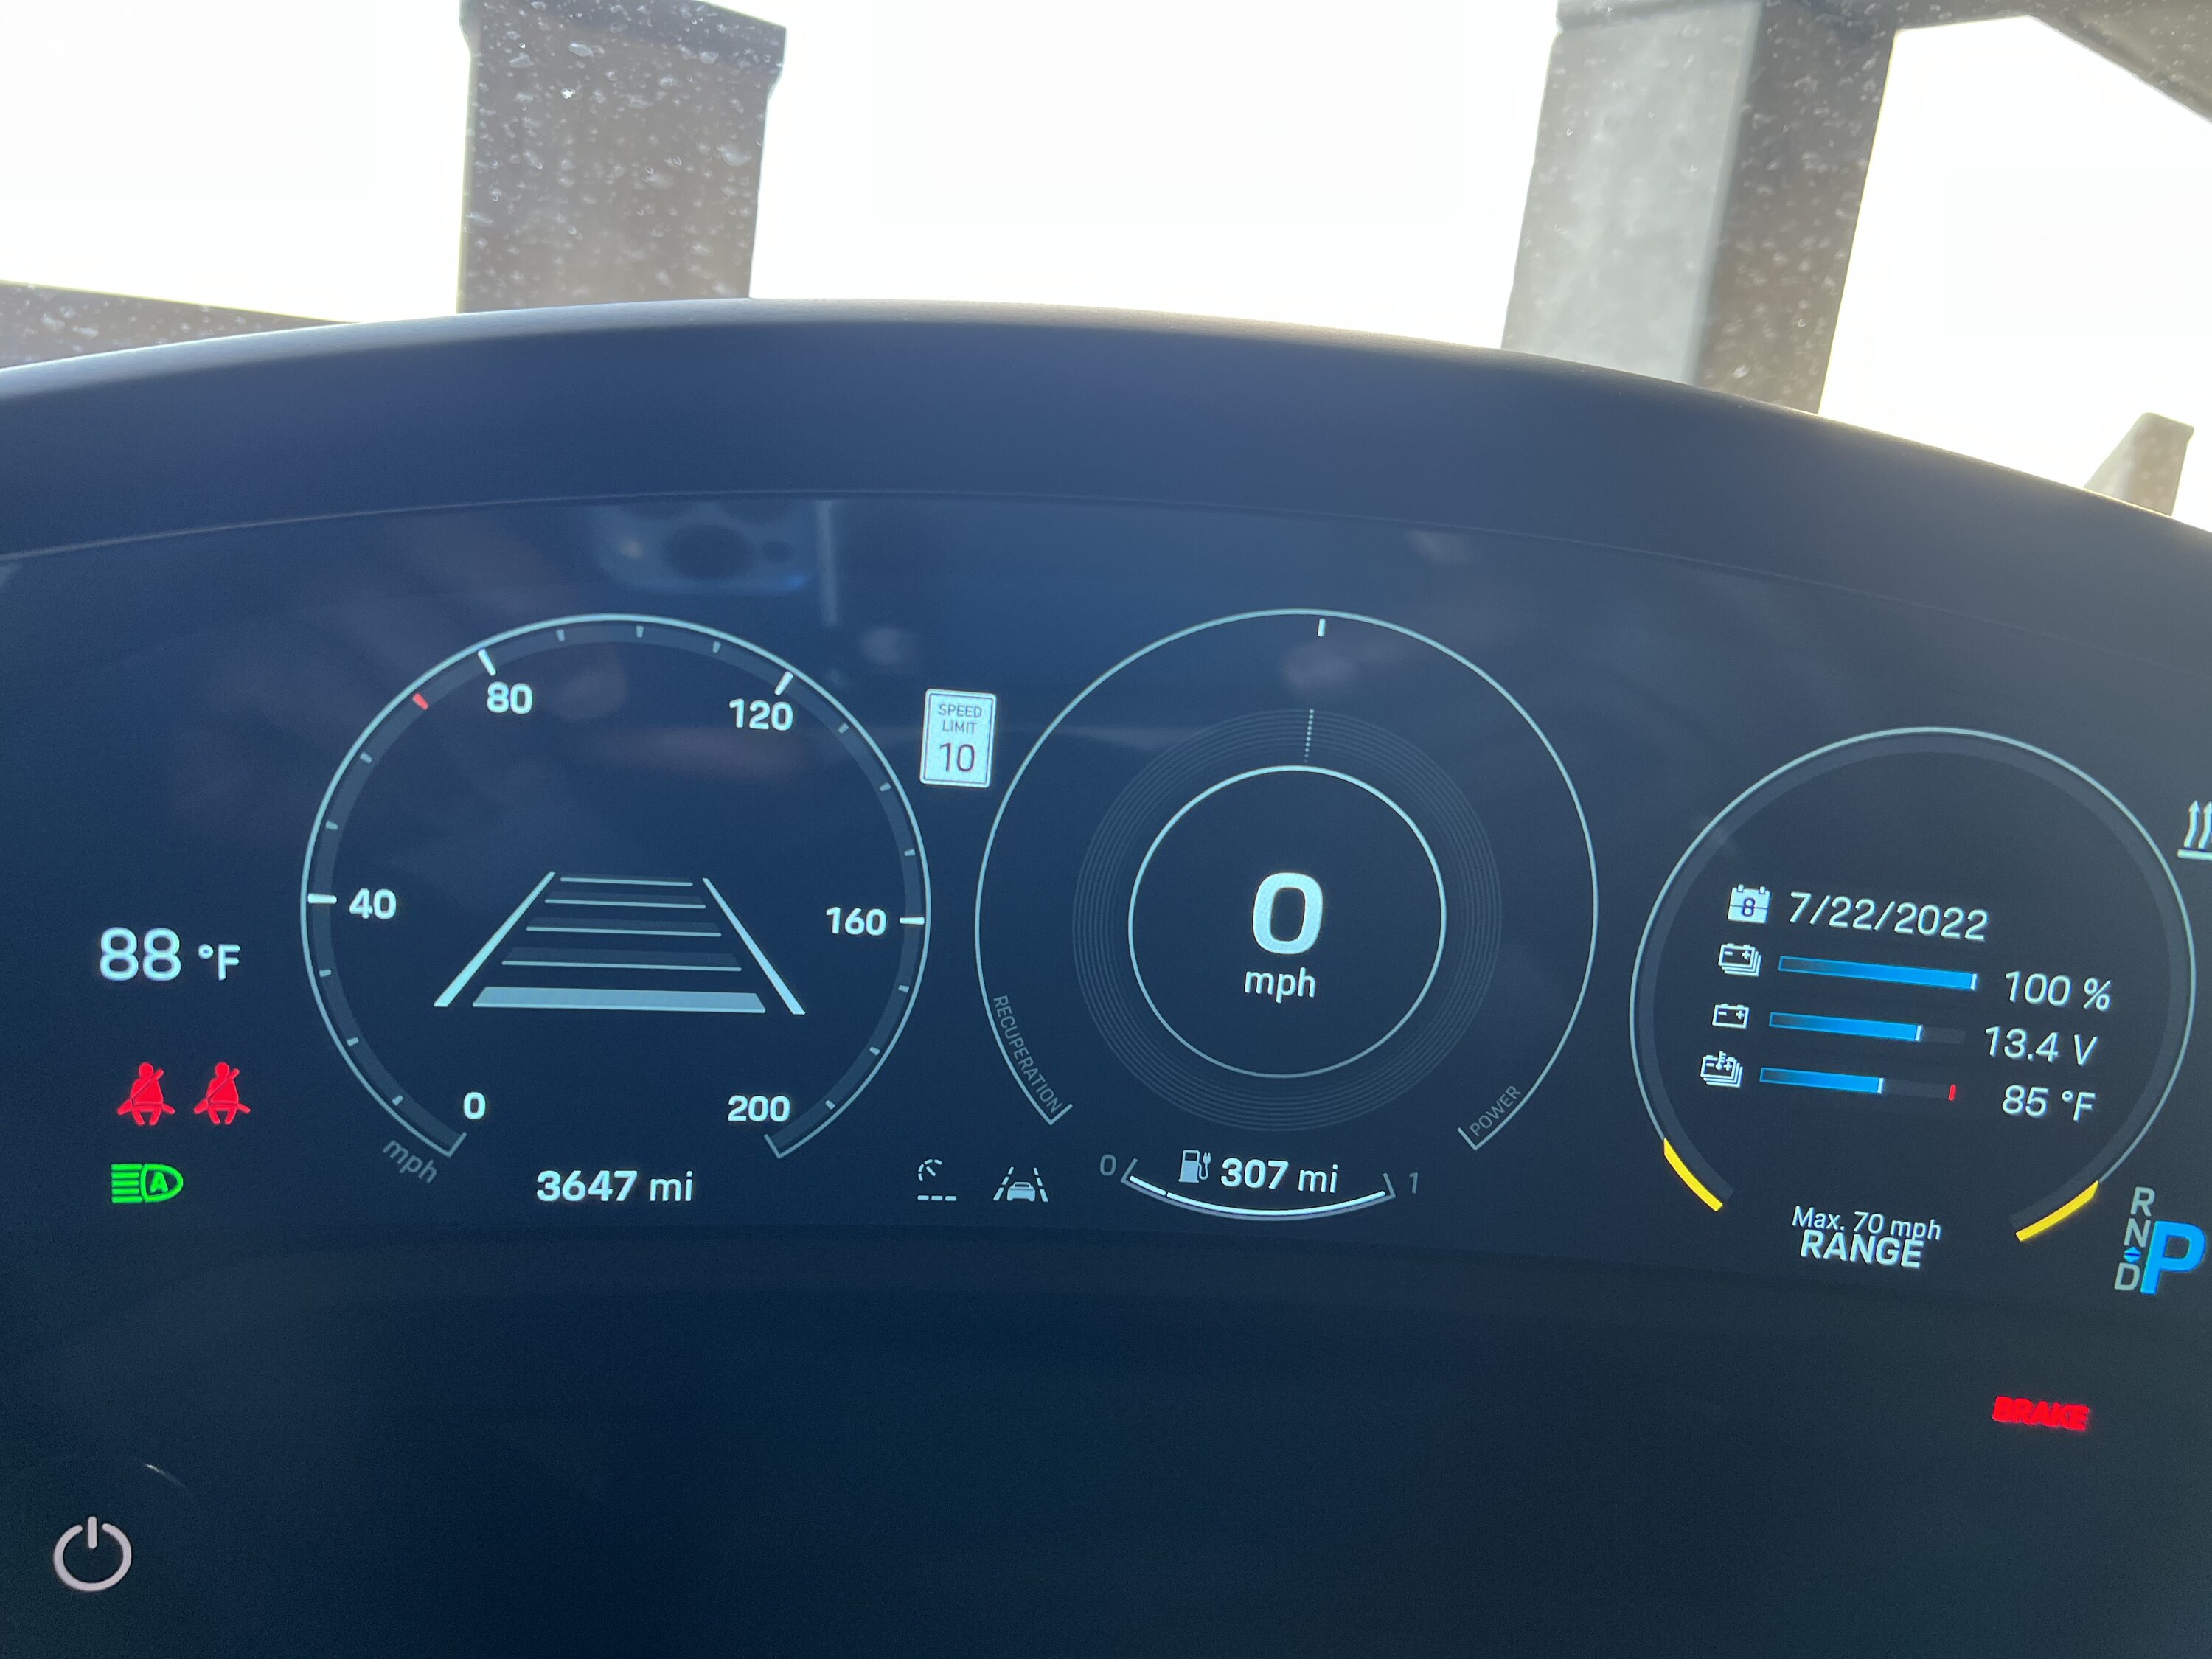 Porsche Taycan 271 miles!  100% charged. What’s your range shown? 8888C883-3A33-45A5-A986-4AA18EAC1A7A